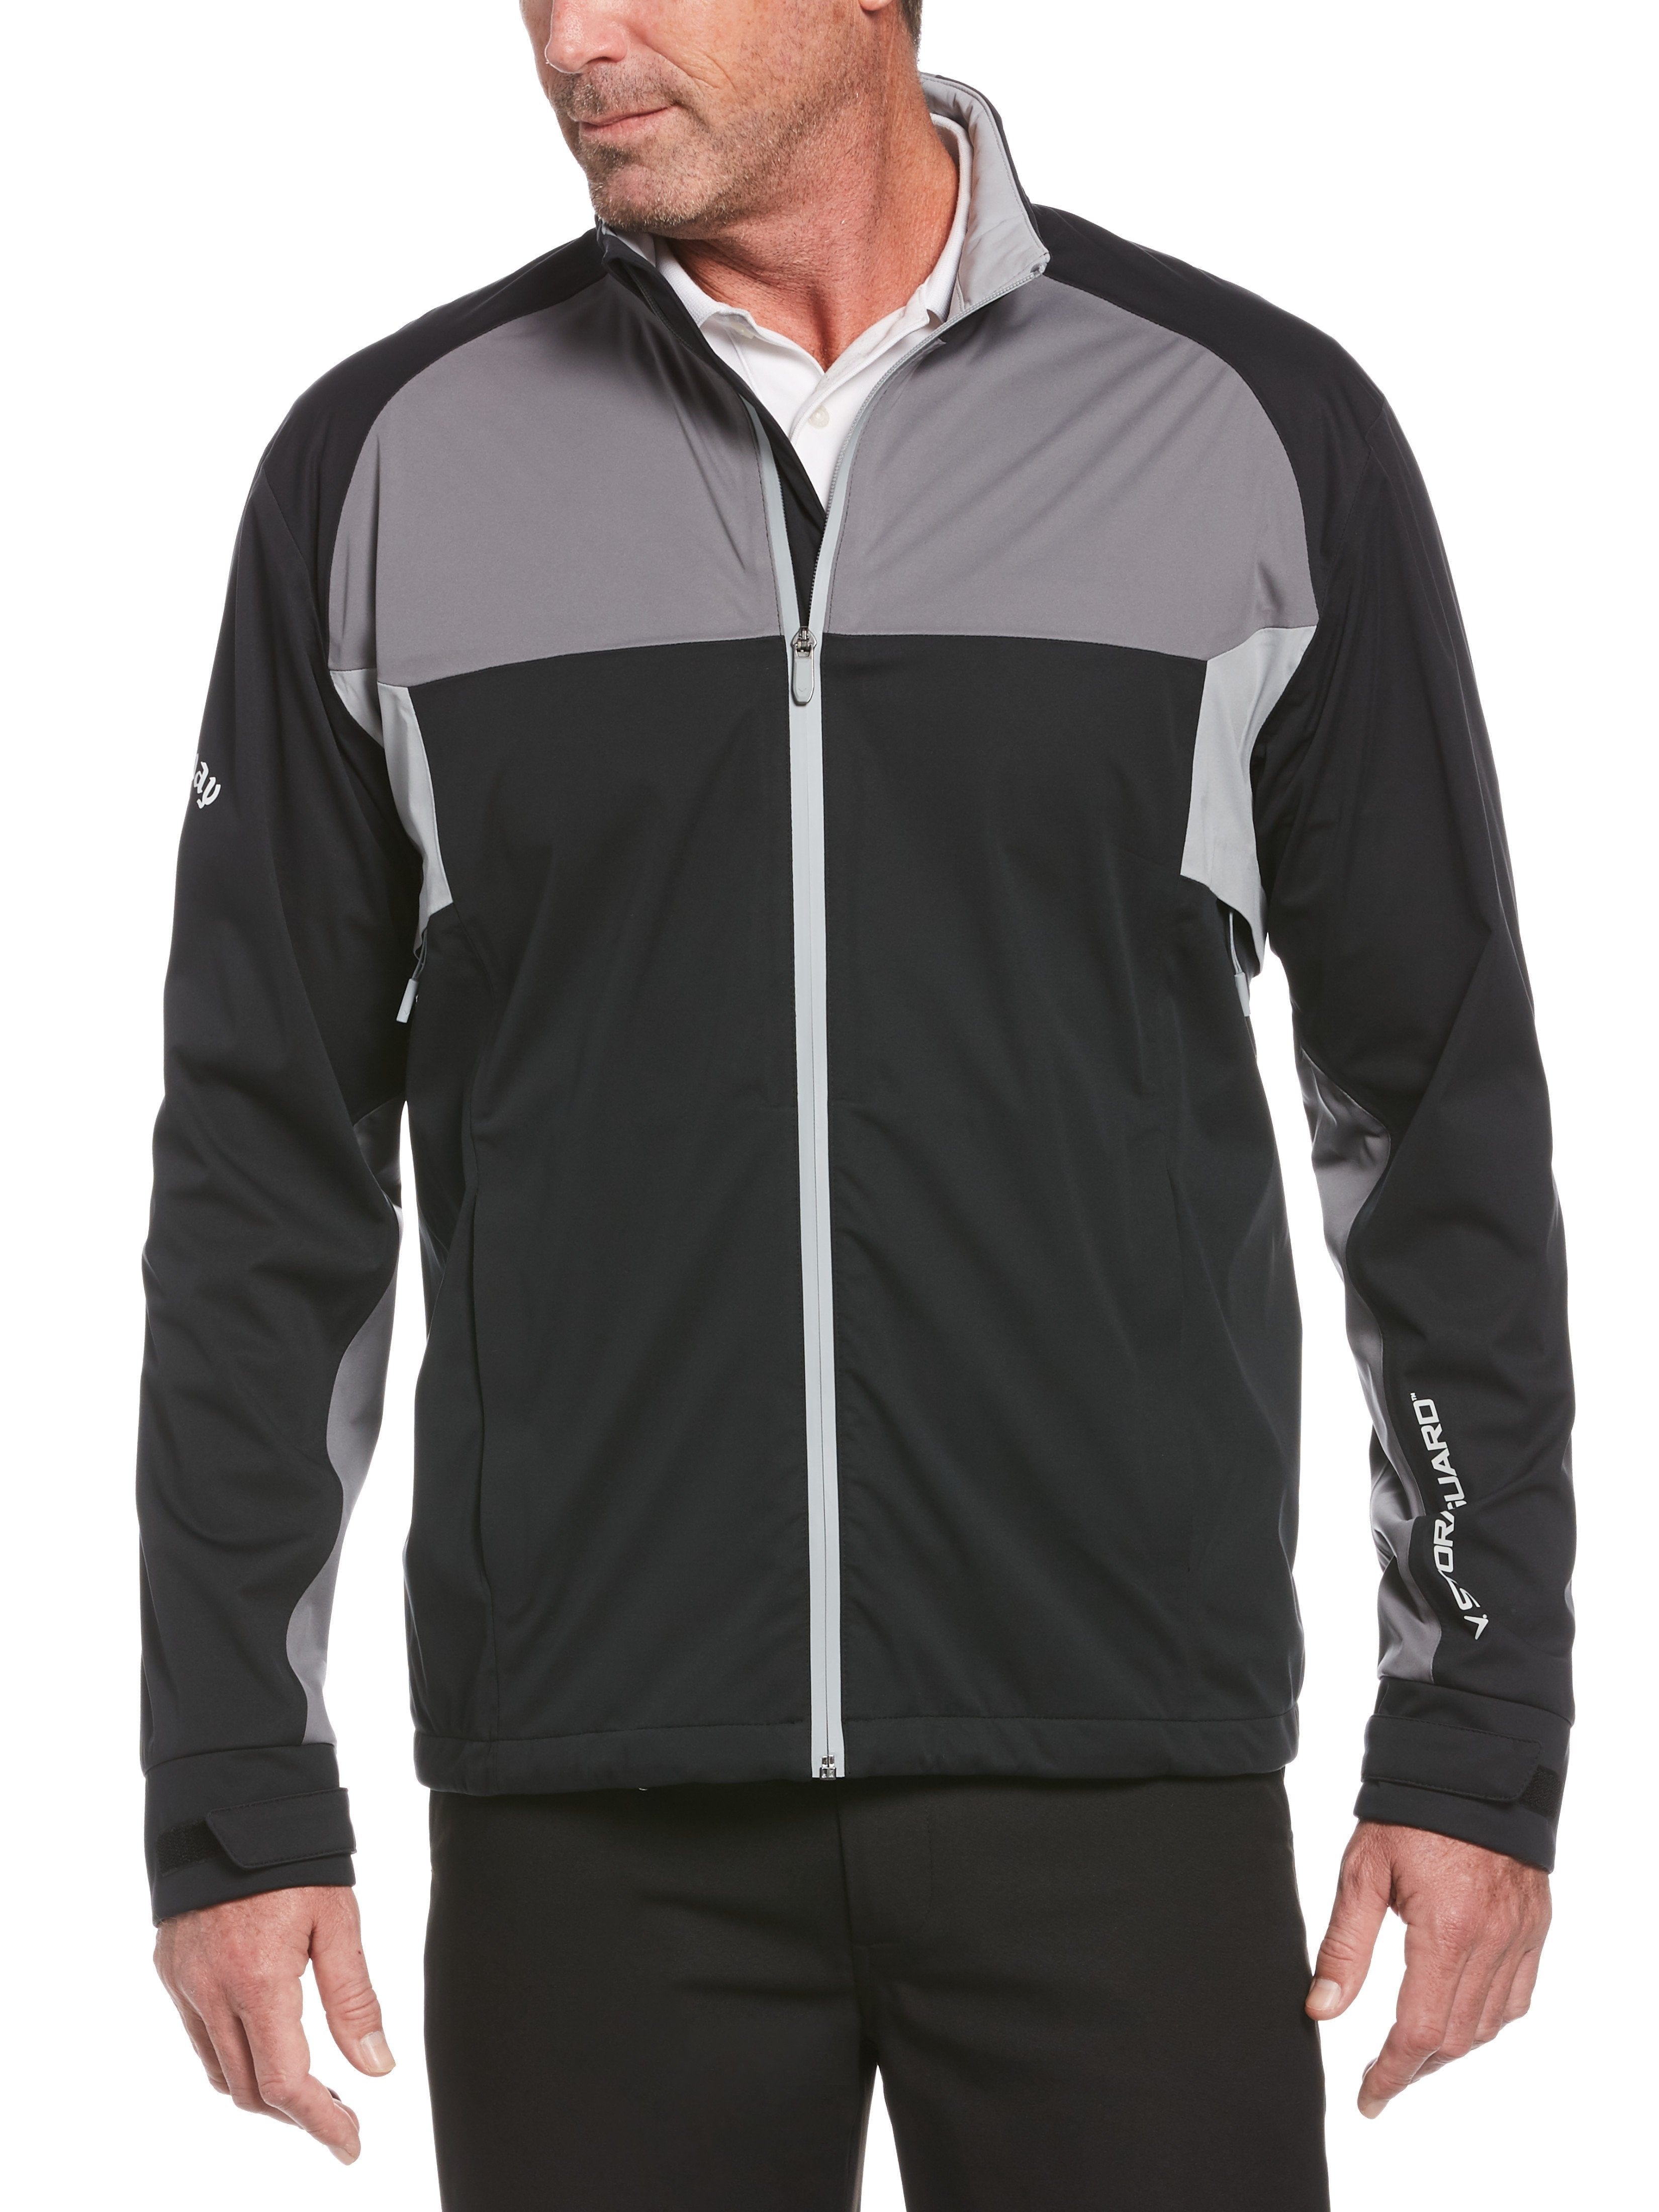 Callaway Apparel Mens Swing Tech™ StormGuard™ Water-Resistant Golf Jacket Top, Size XL, Black, Recycled Polyester/Polyester | Golf Apparel Shop